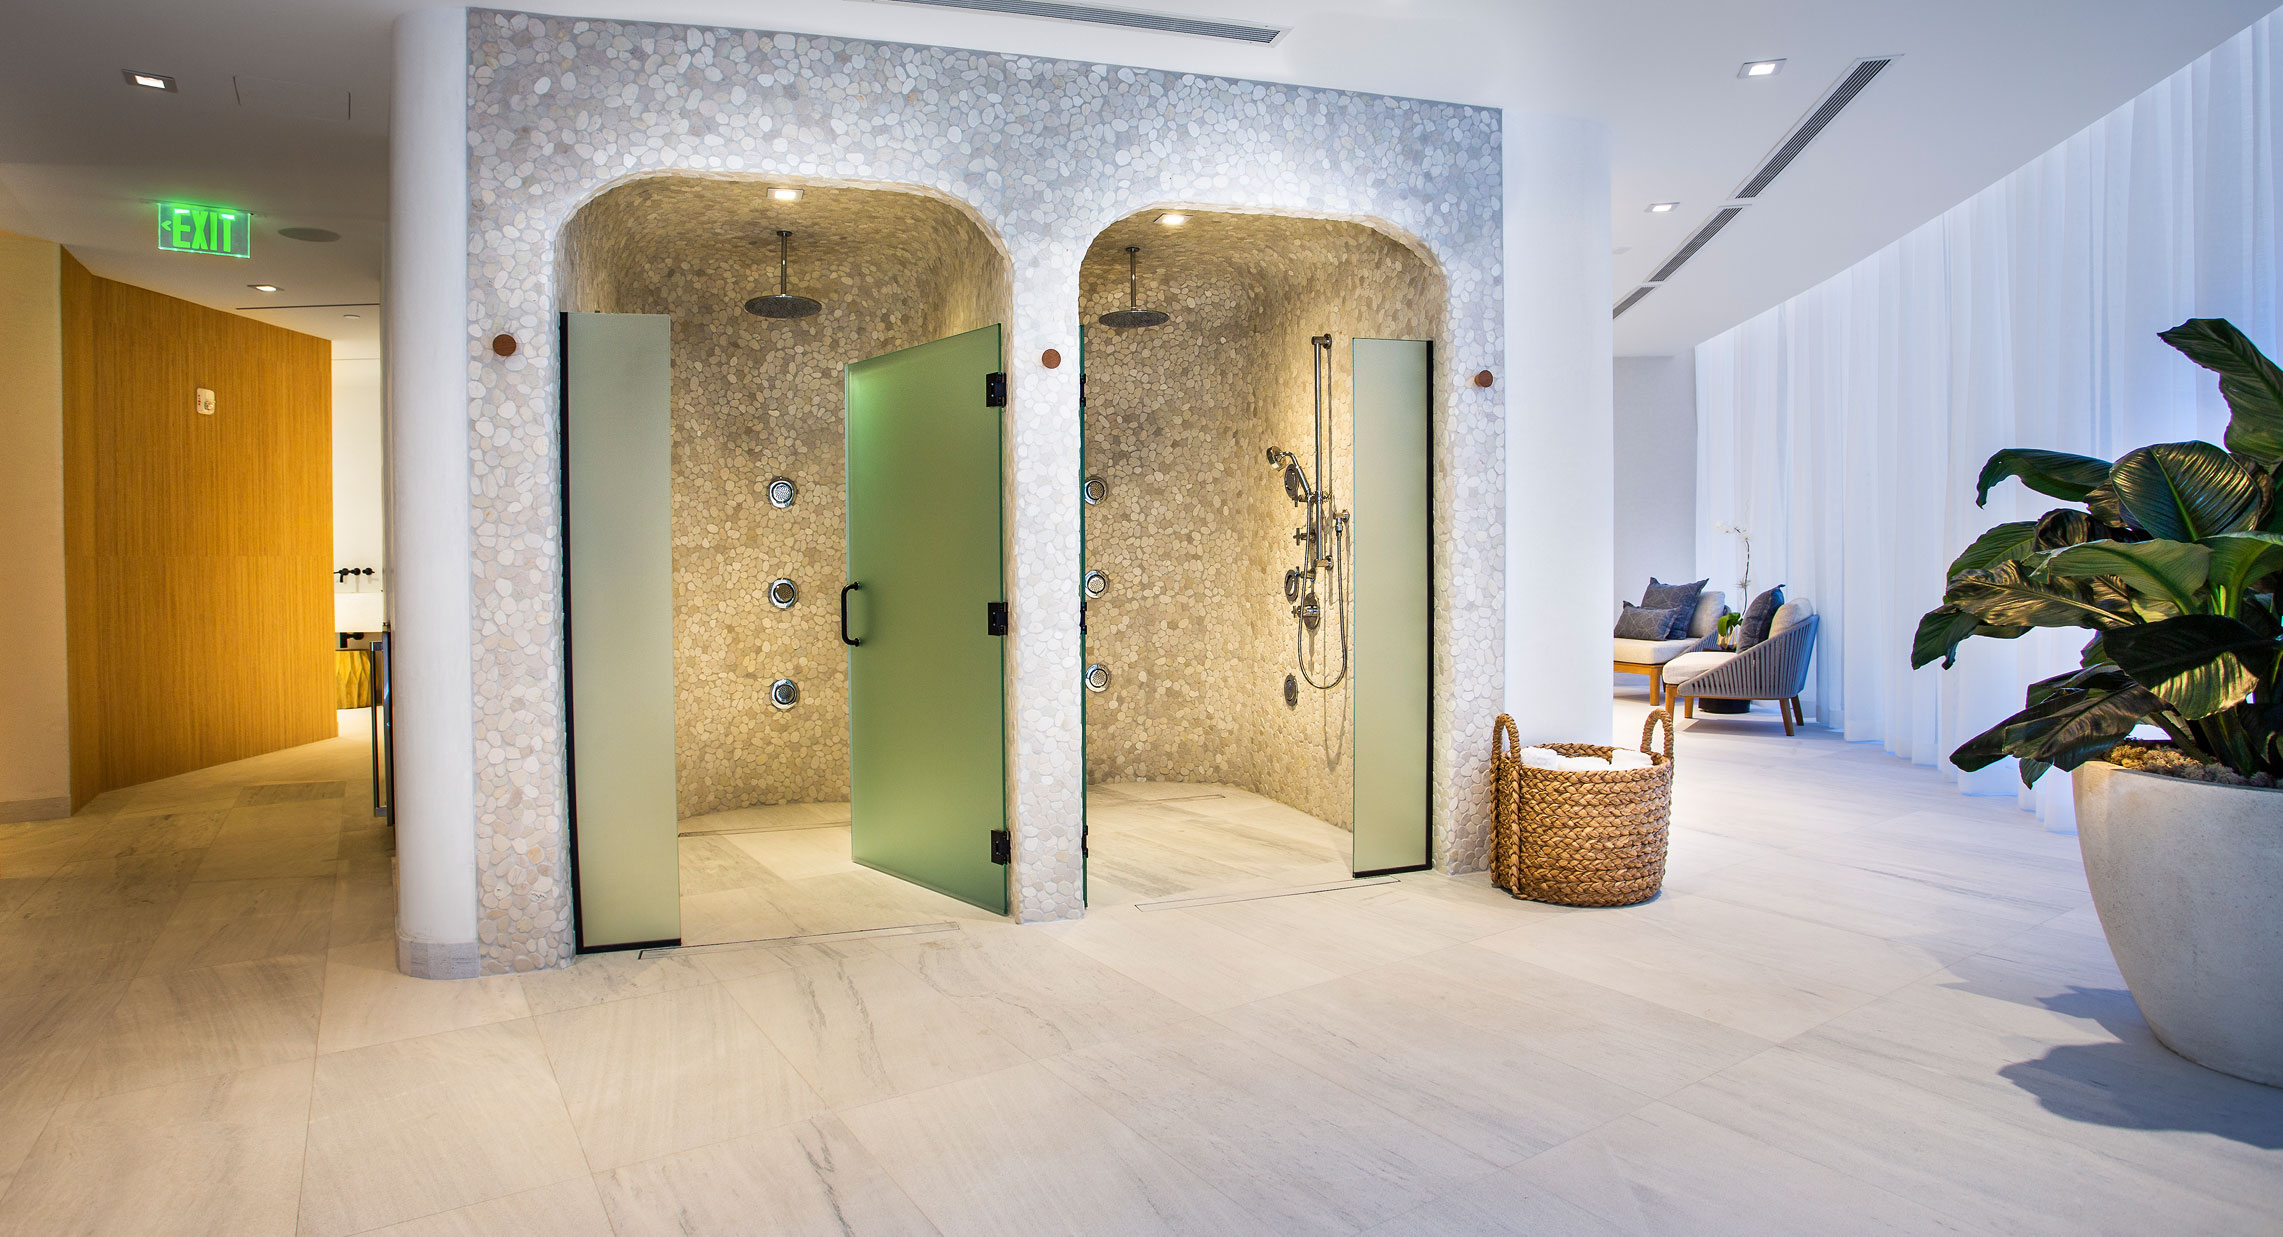 Locker room of luxury spa showing two tile showers with frosted glass doors.